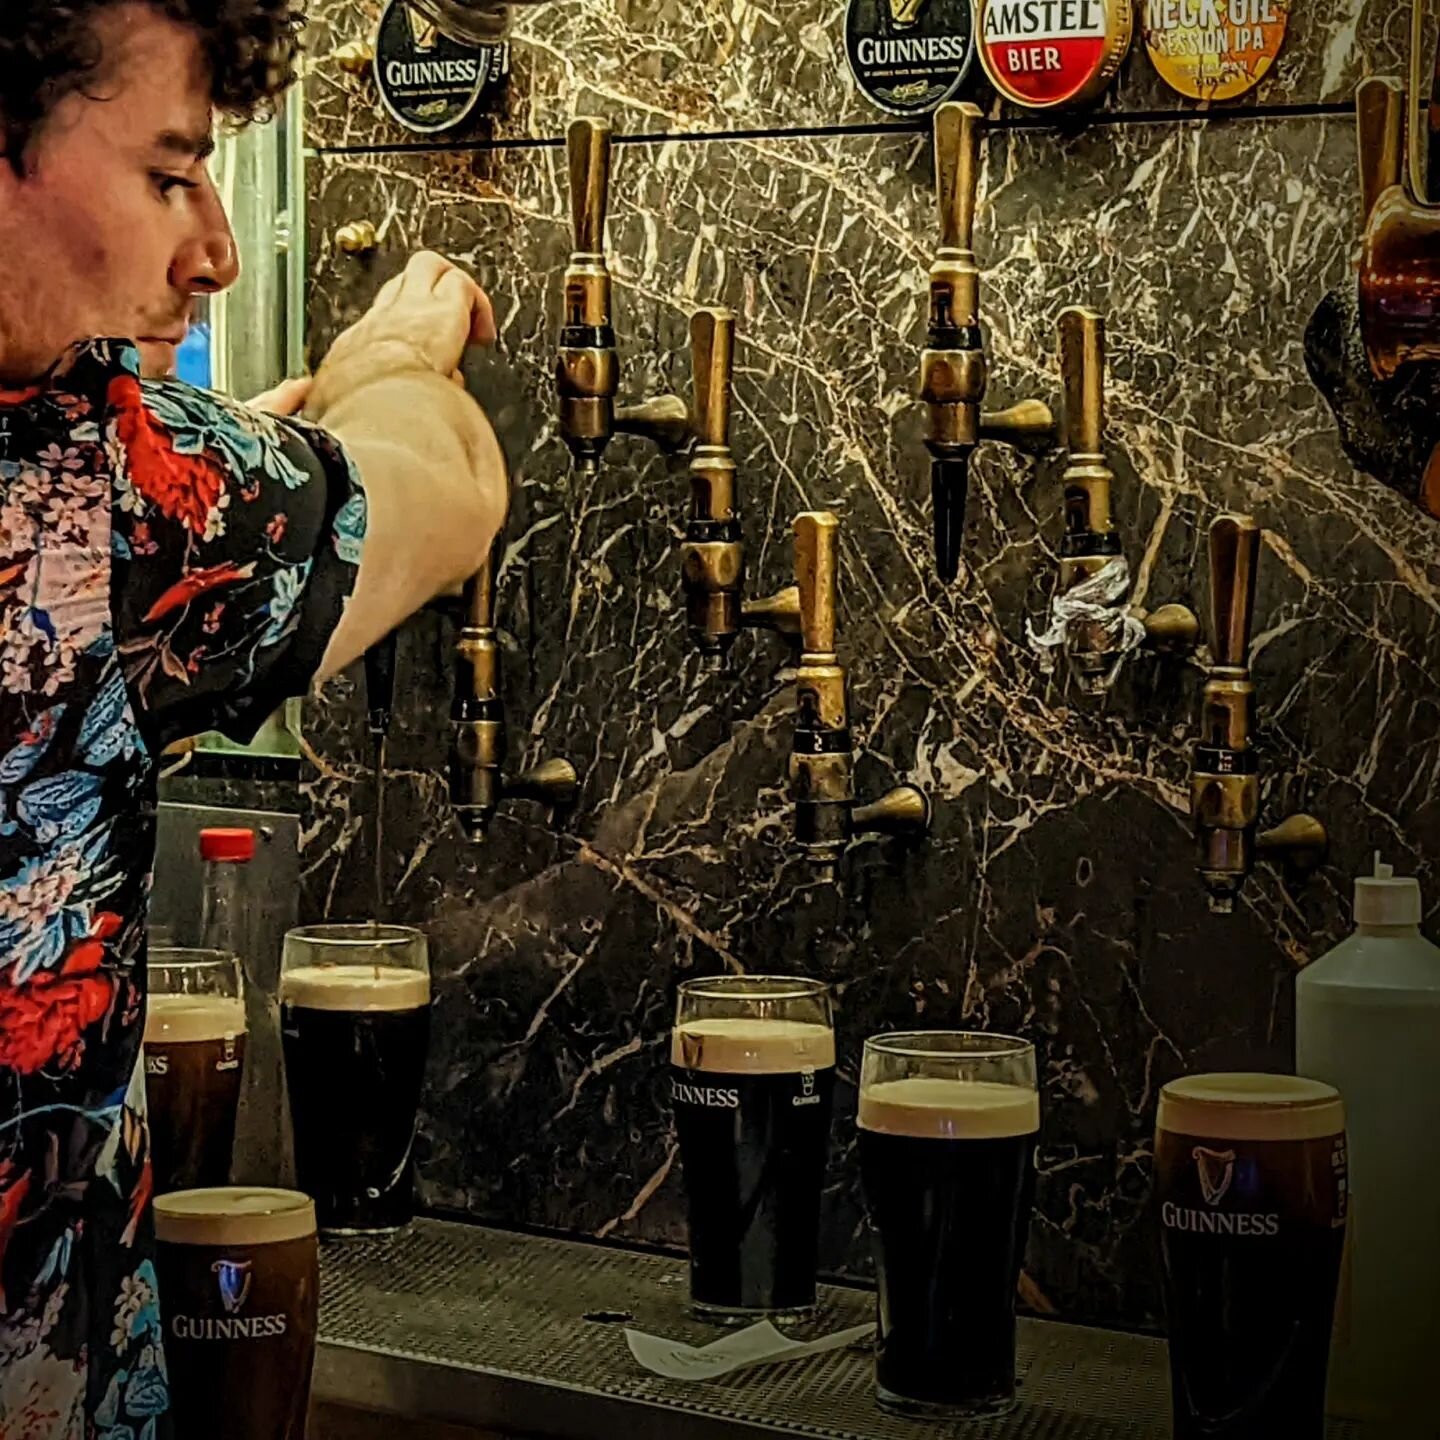 The only thing better than a pint of Guinness .... is another pint of Guinness. 

House Speciality Cocktails ✔️
Classic Cocktails ✔️
Draught Beer ✔️
Great tunes ✔️
Great craic ✔️

Happy Friday everyone! 

Slaint&eacute; ☘️